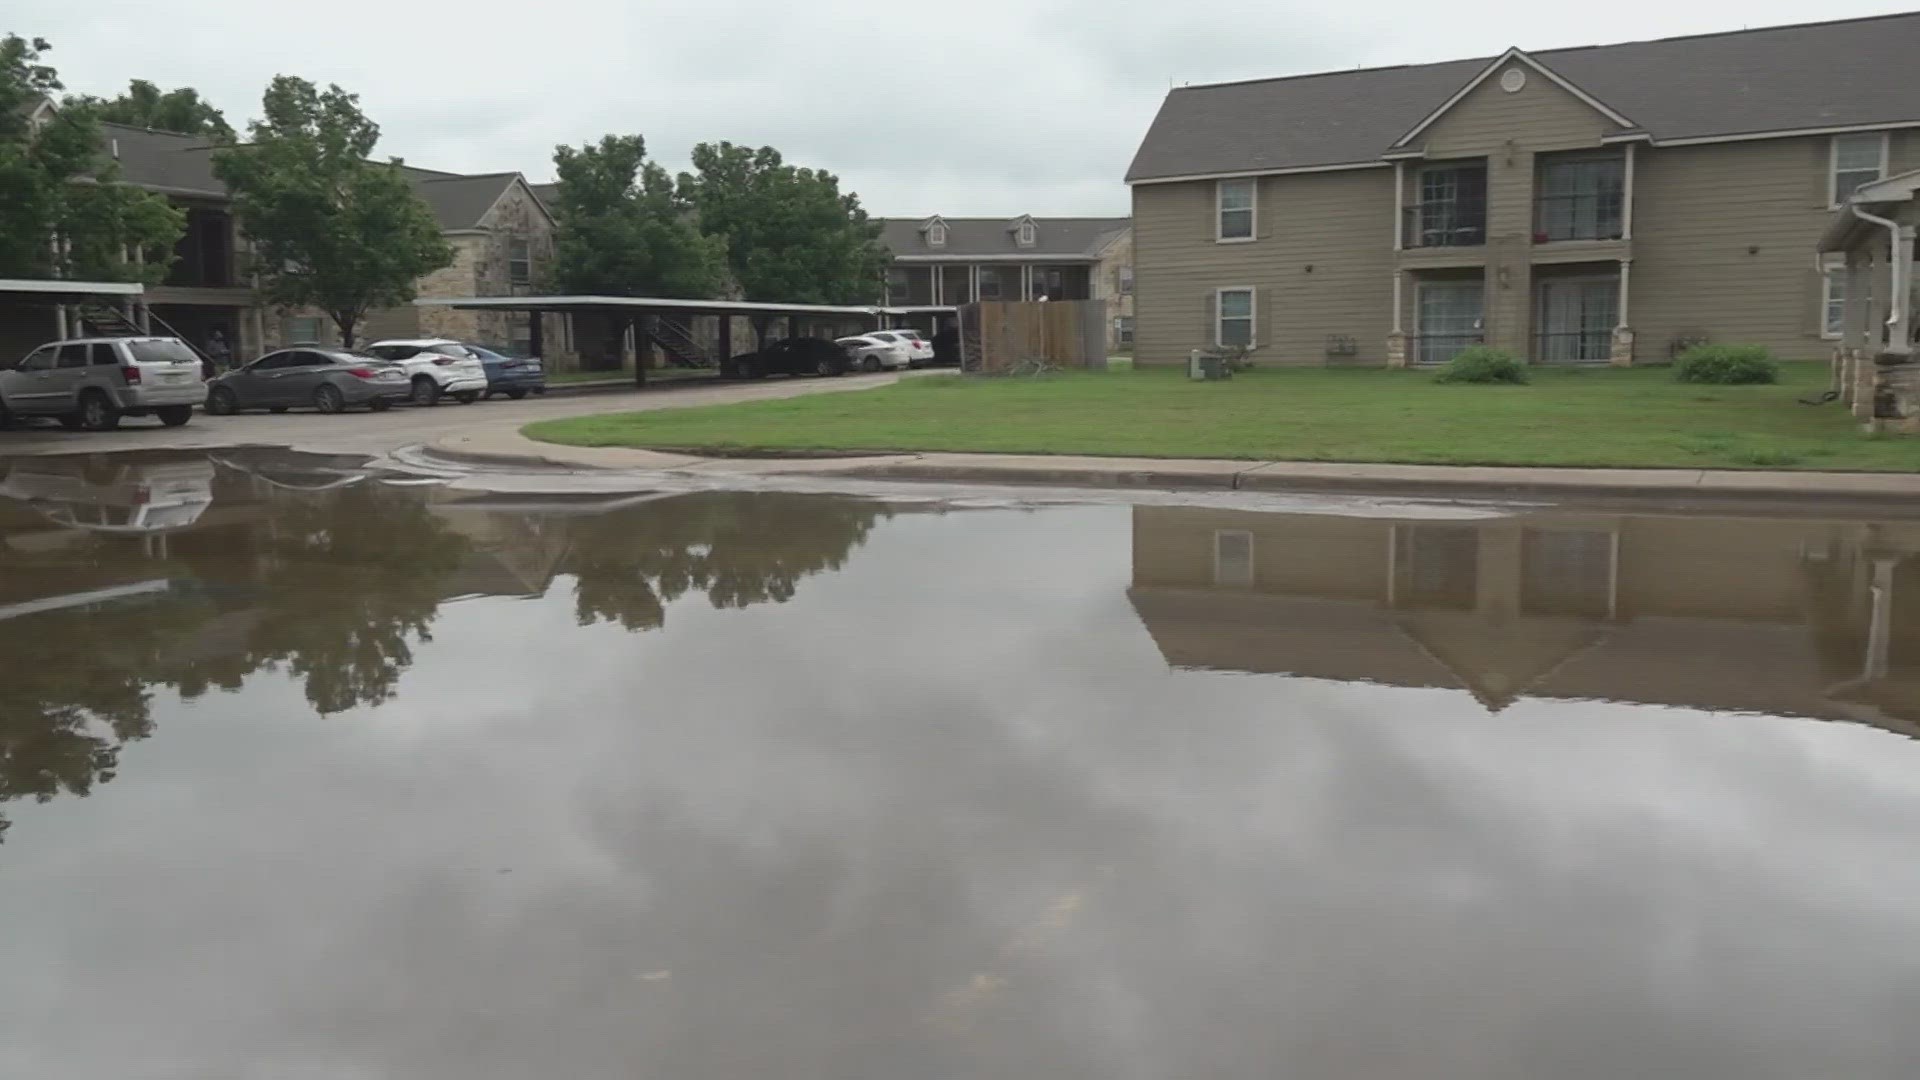 Property owner says city officials aren't being helpful.